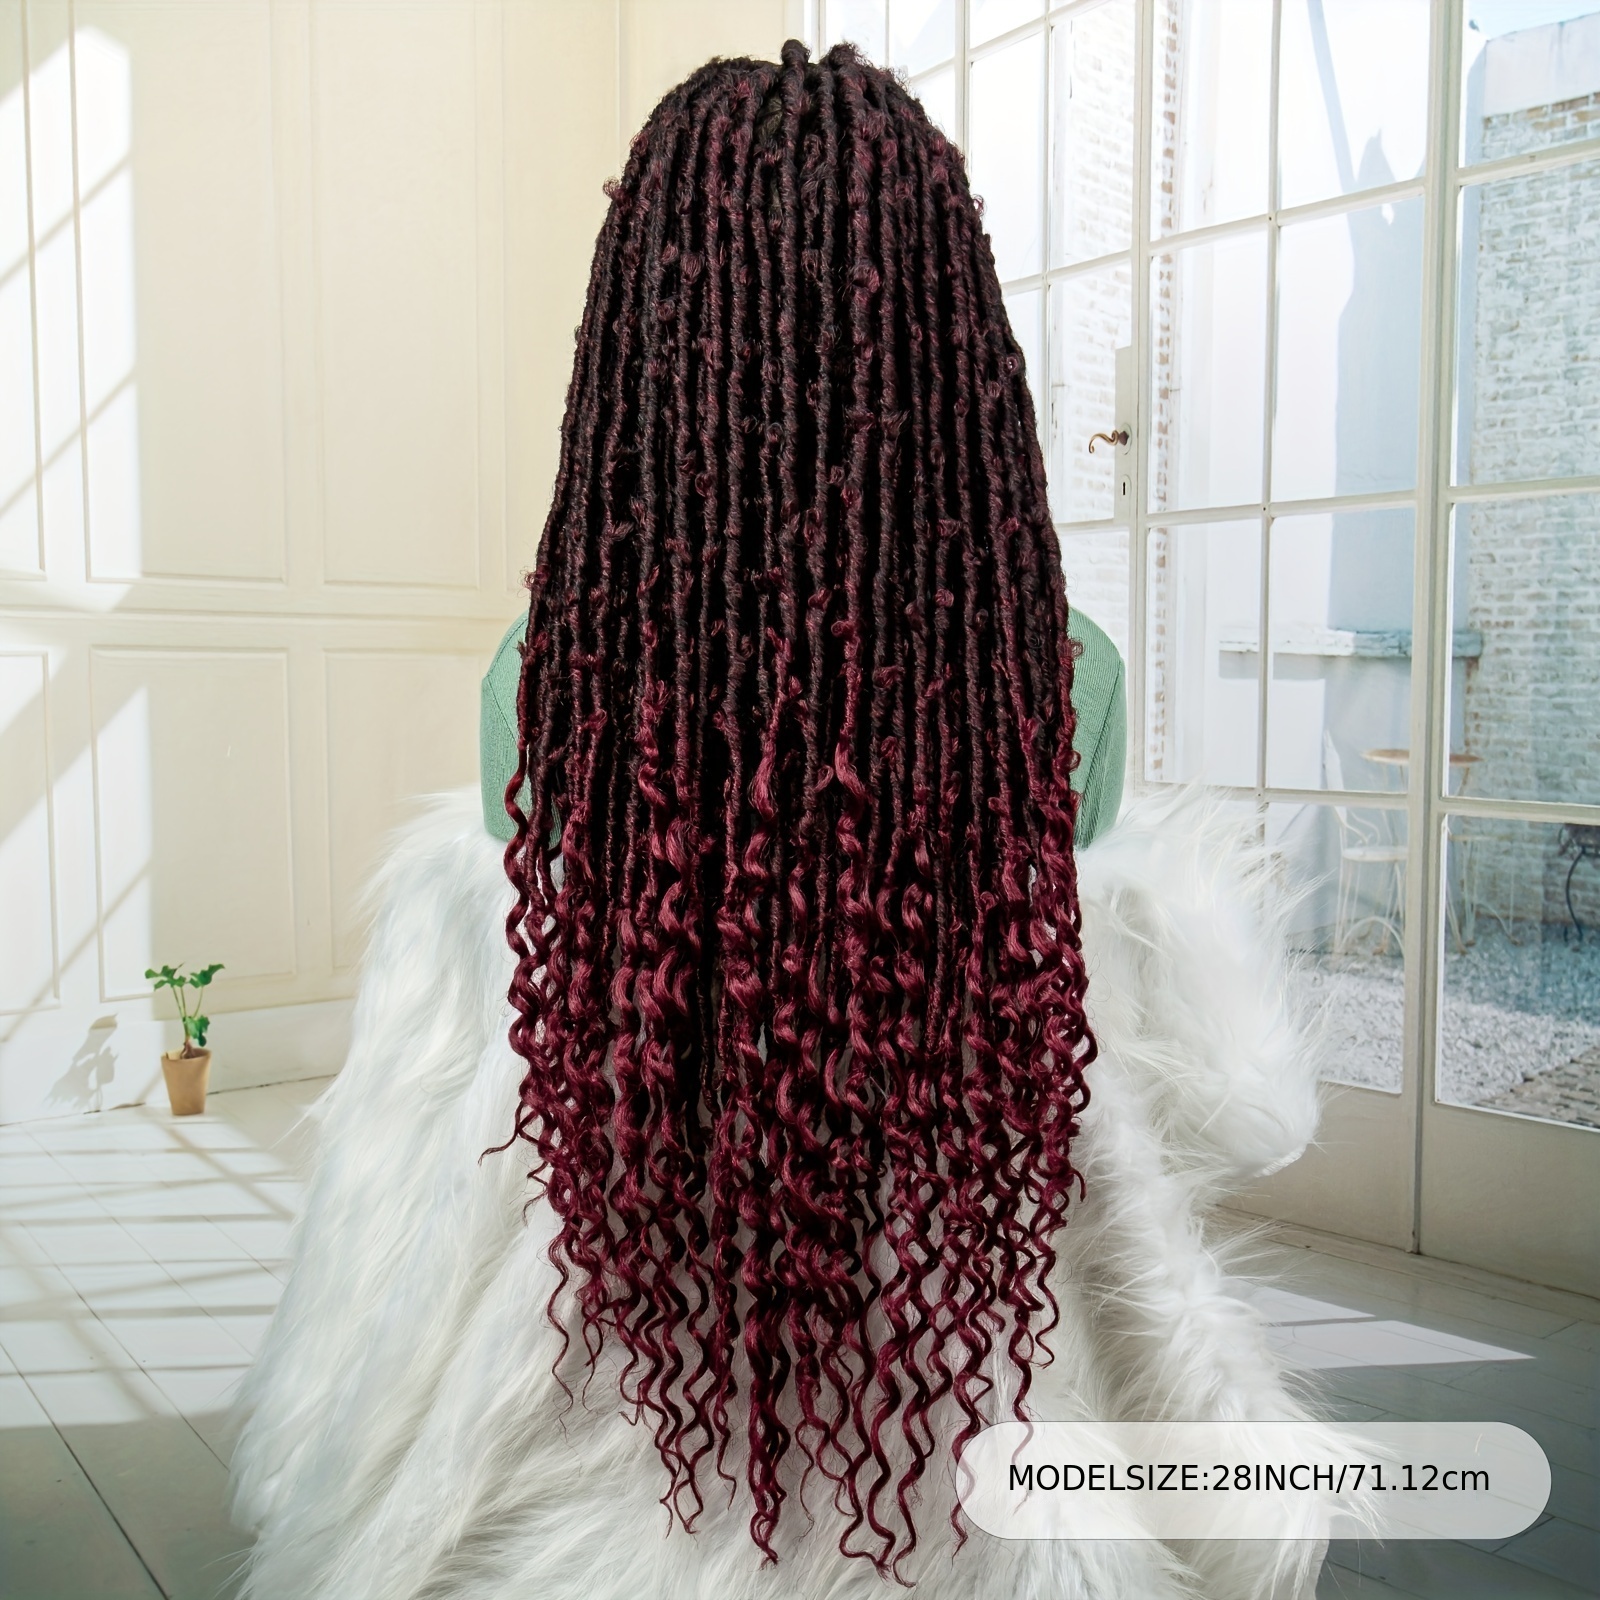 4 Braids Wine Red Lace Front Wigs Burgundy Box Braids Hairstyles